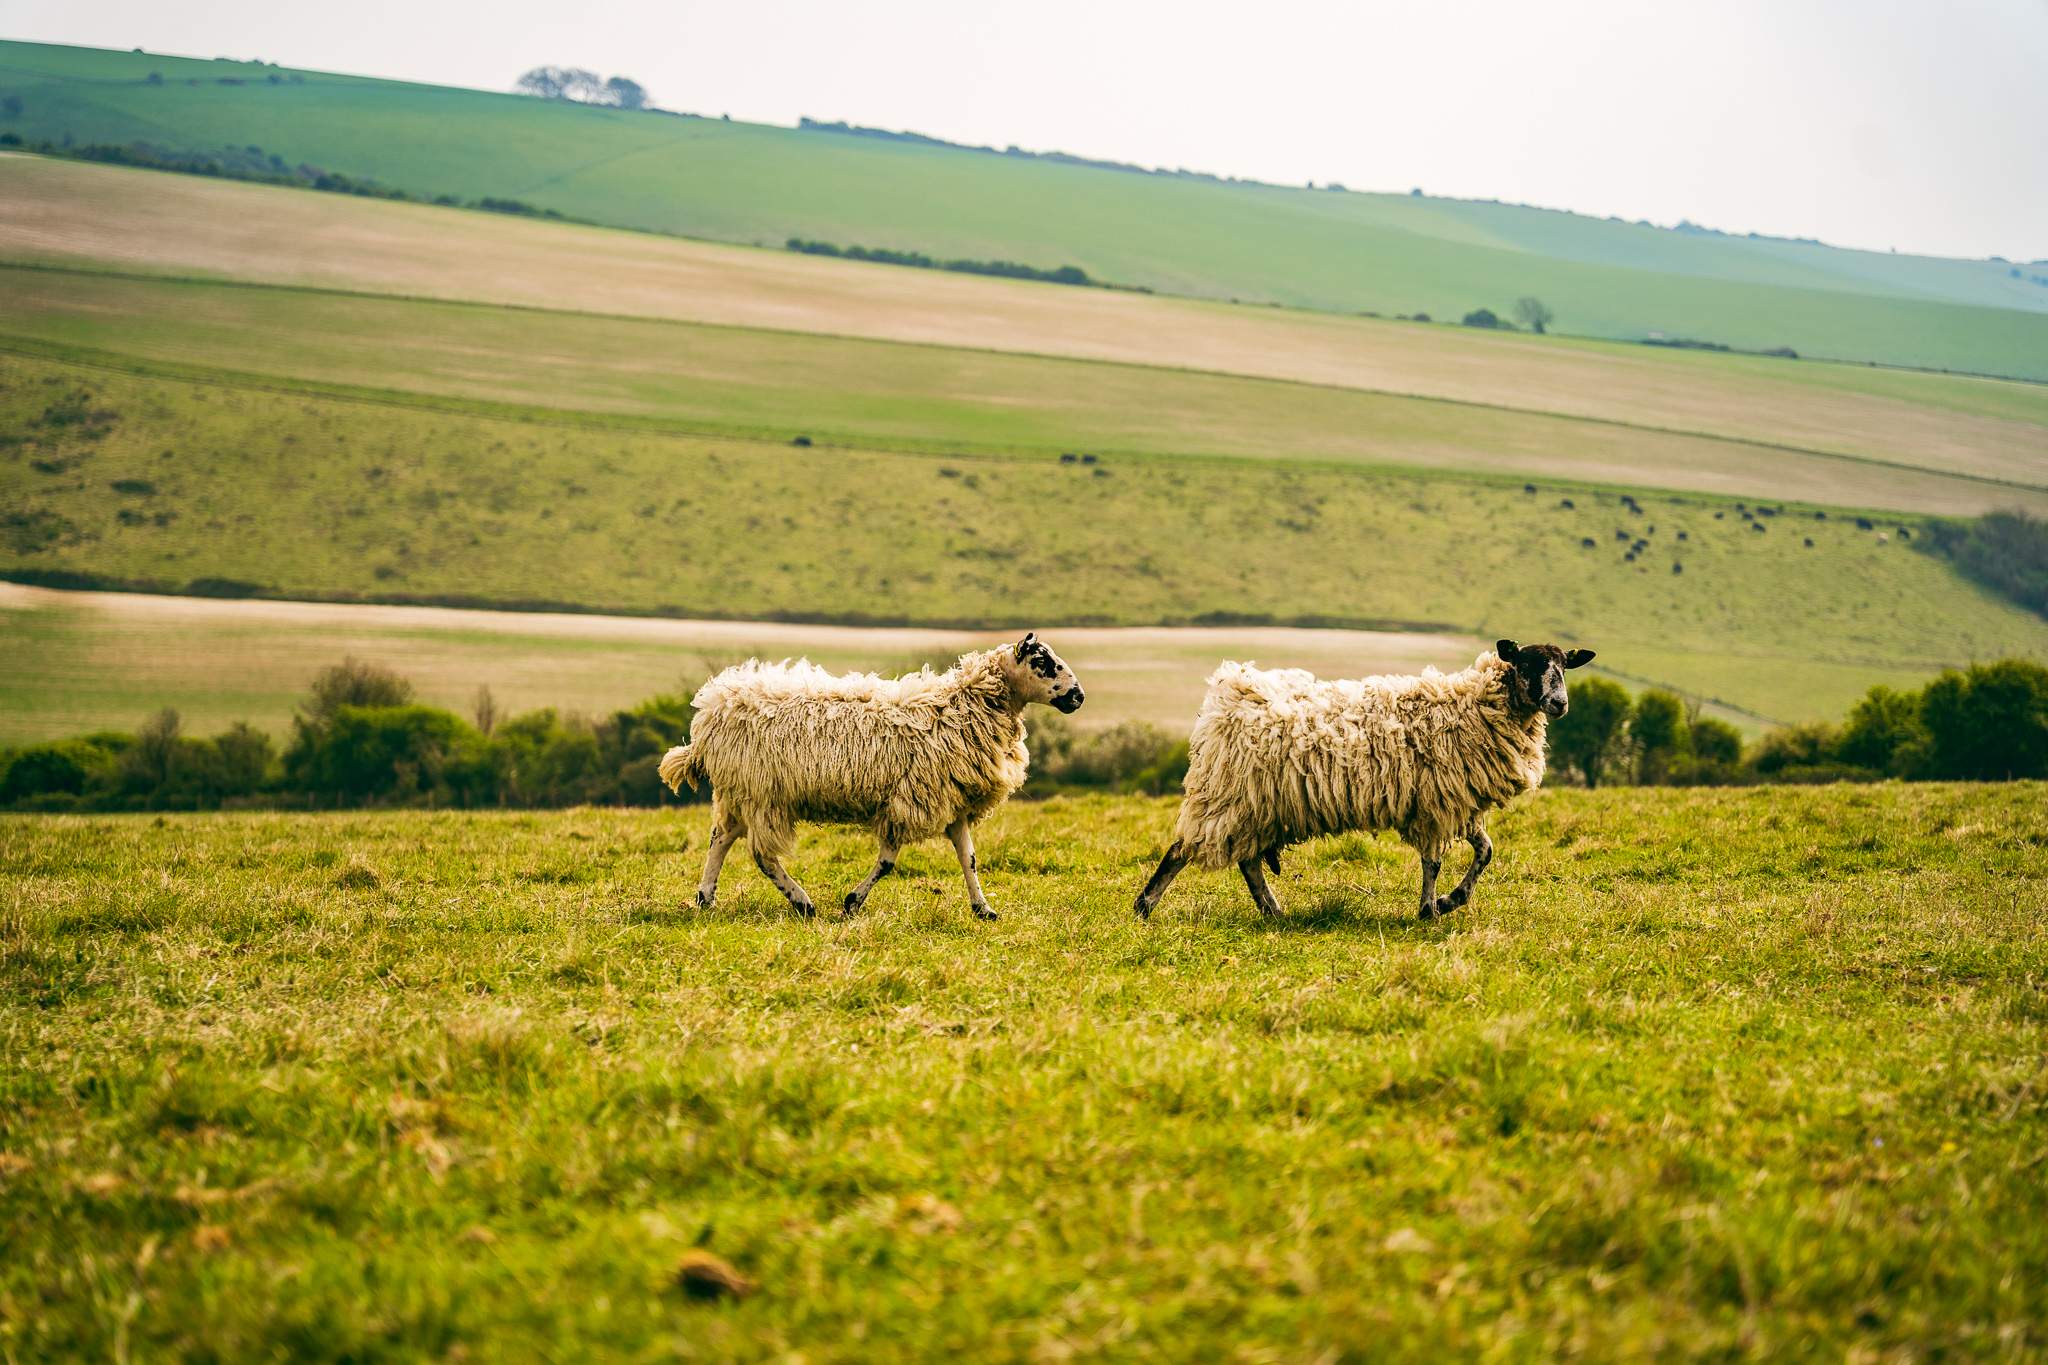 A pair of sheep strolling across the meadow